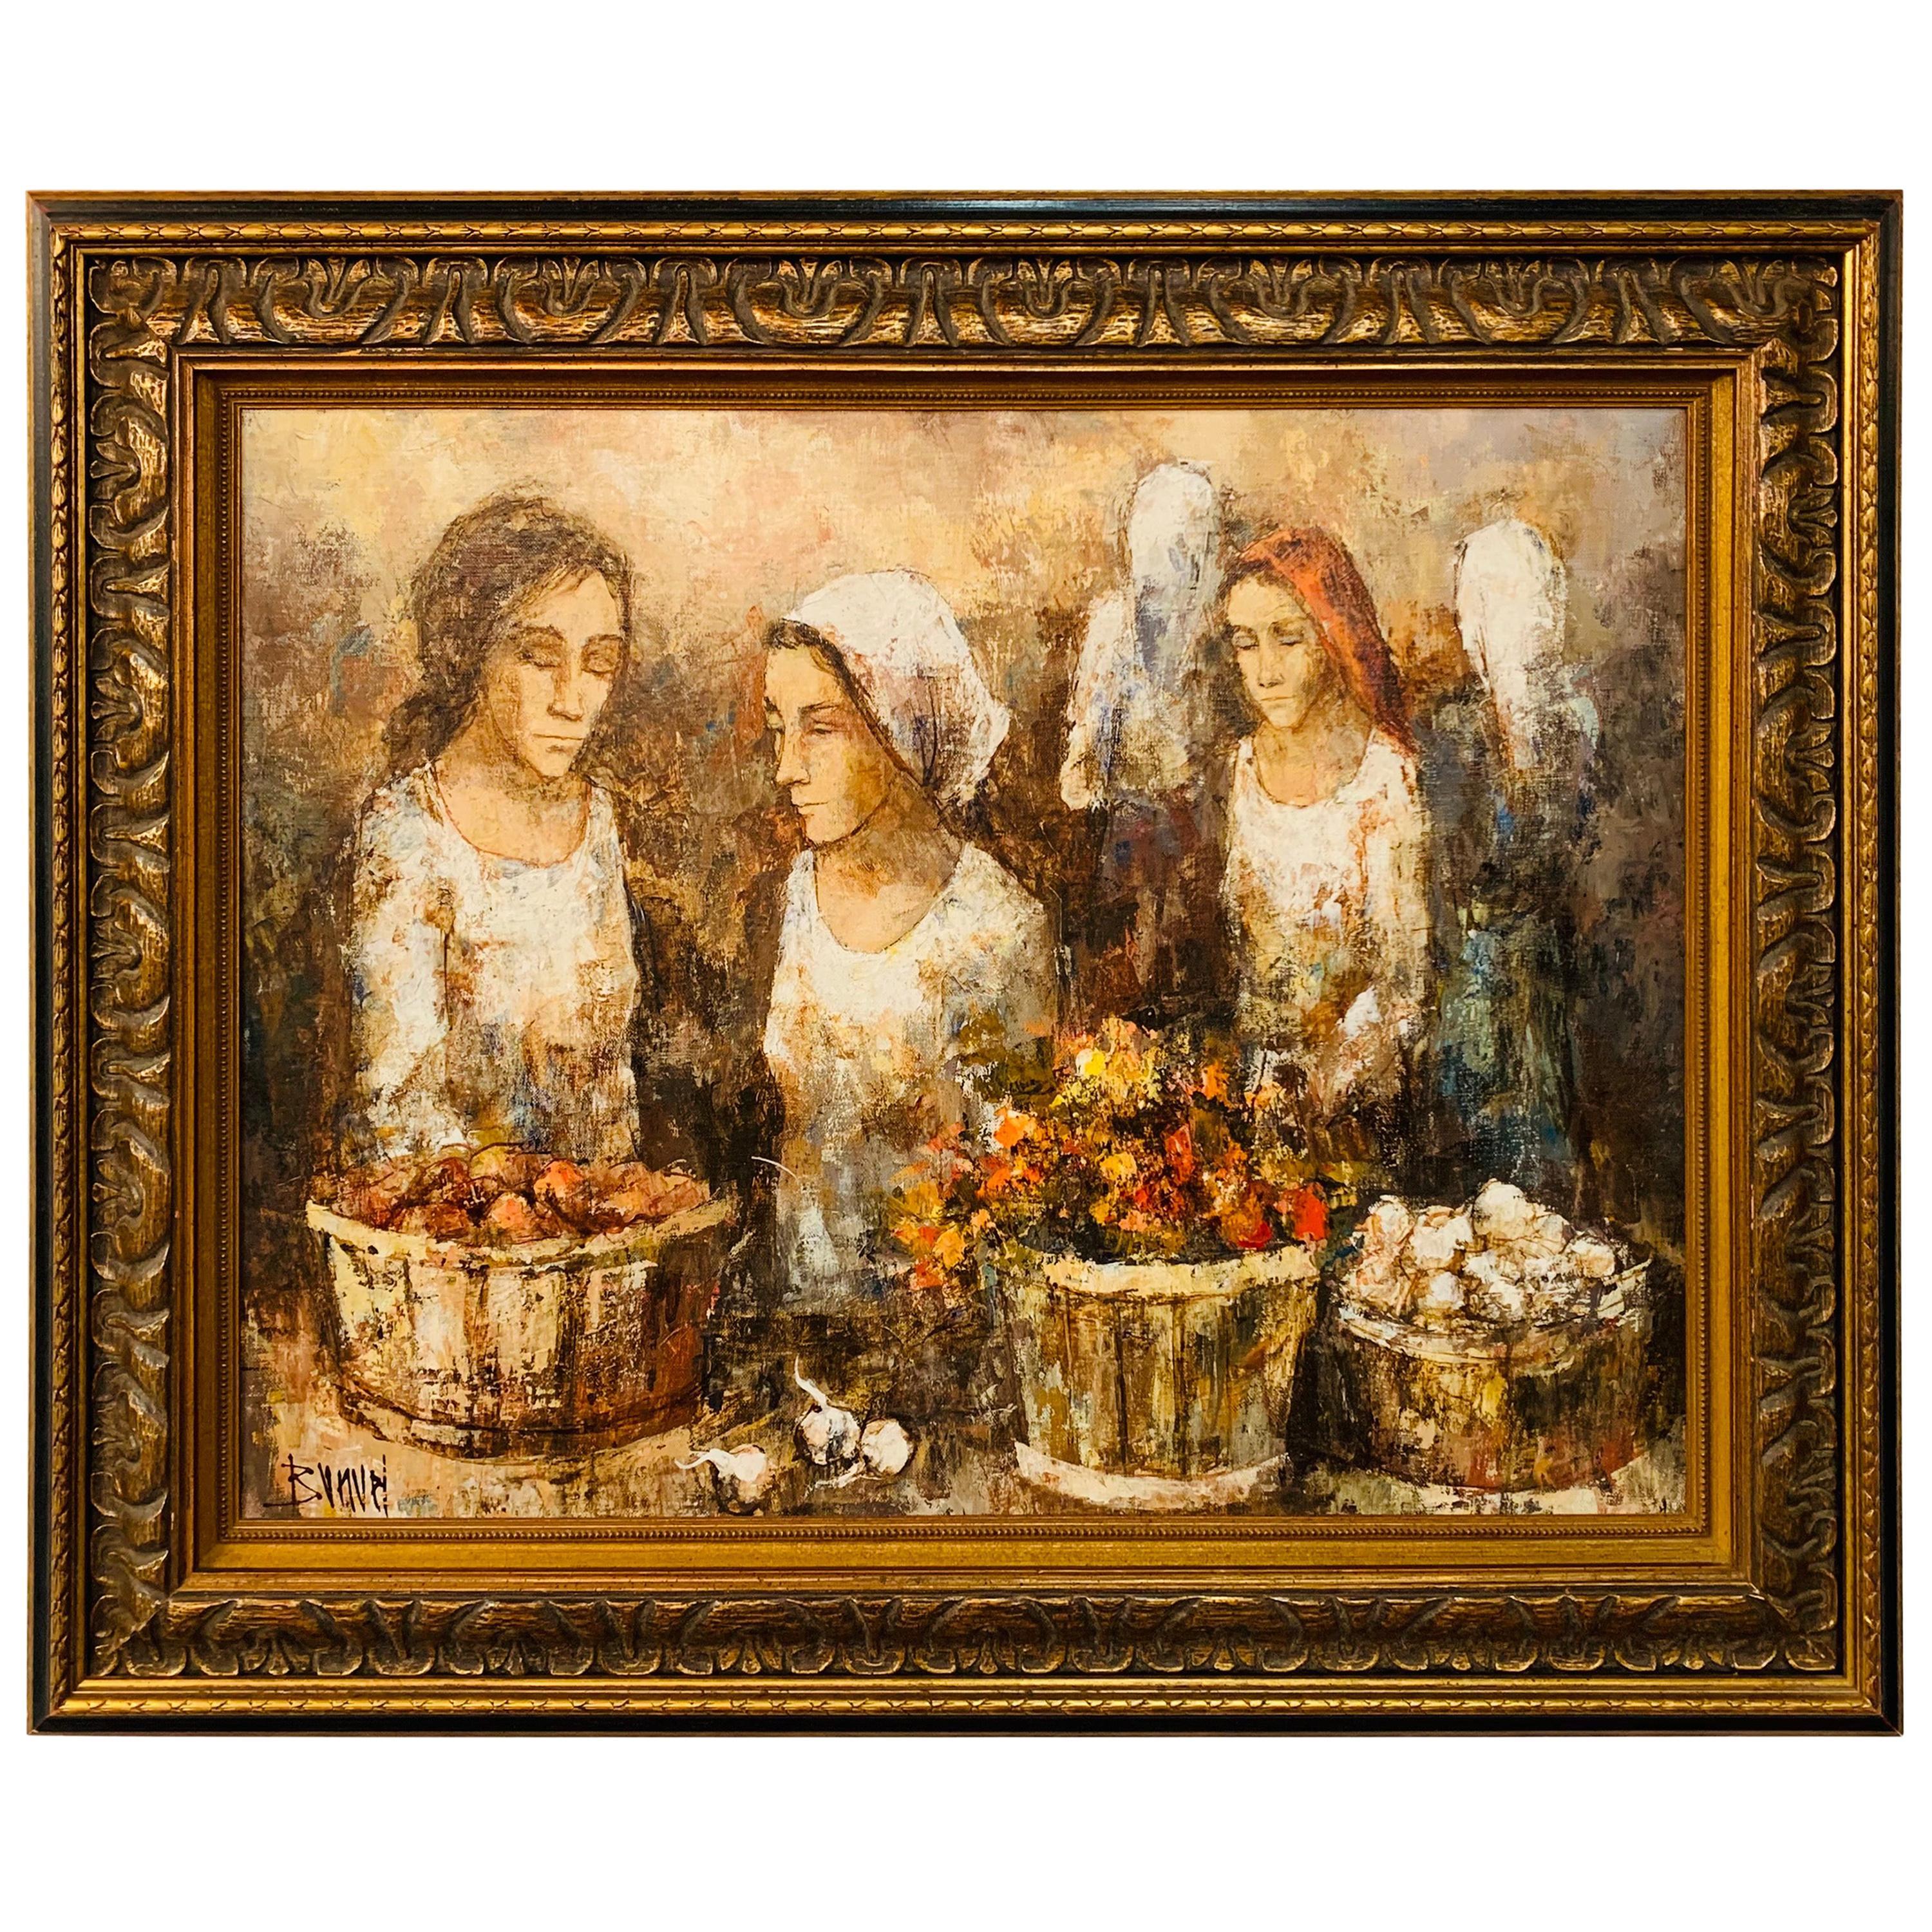 An expressive contemporary impressionistic oil painting on board of three women farmers by listed Spanish artist Manuel Monton Bunuel, (Spain b.1940).
The painting is finely framed in a custom wooden frame.  

Dimensions: 36" W x 28.75" H x 1" D.